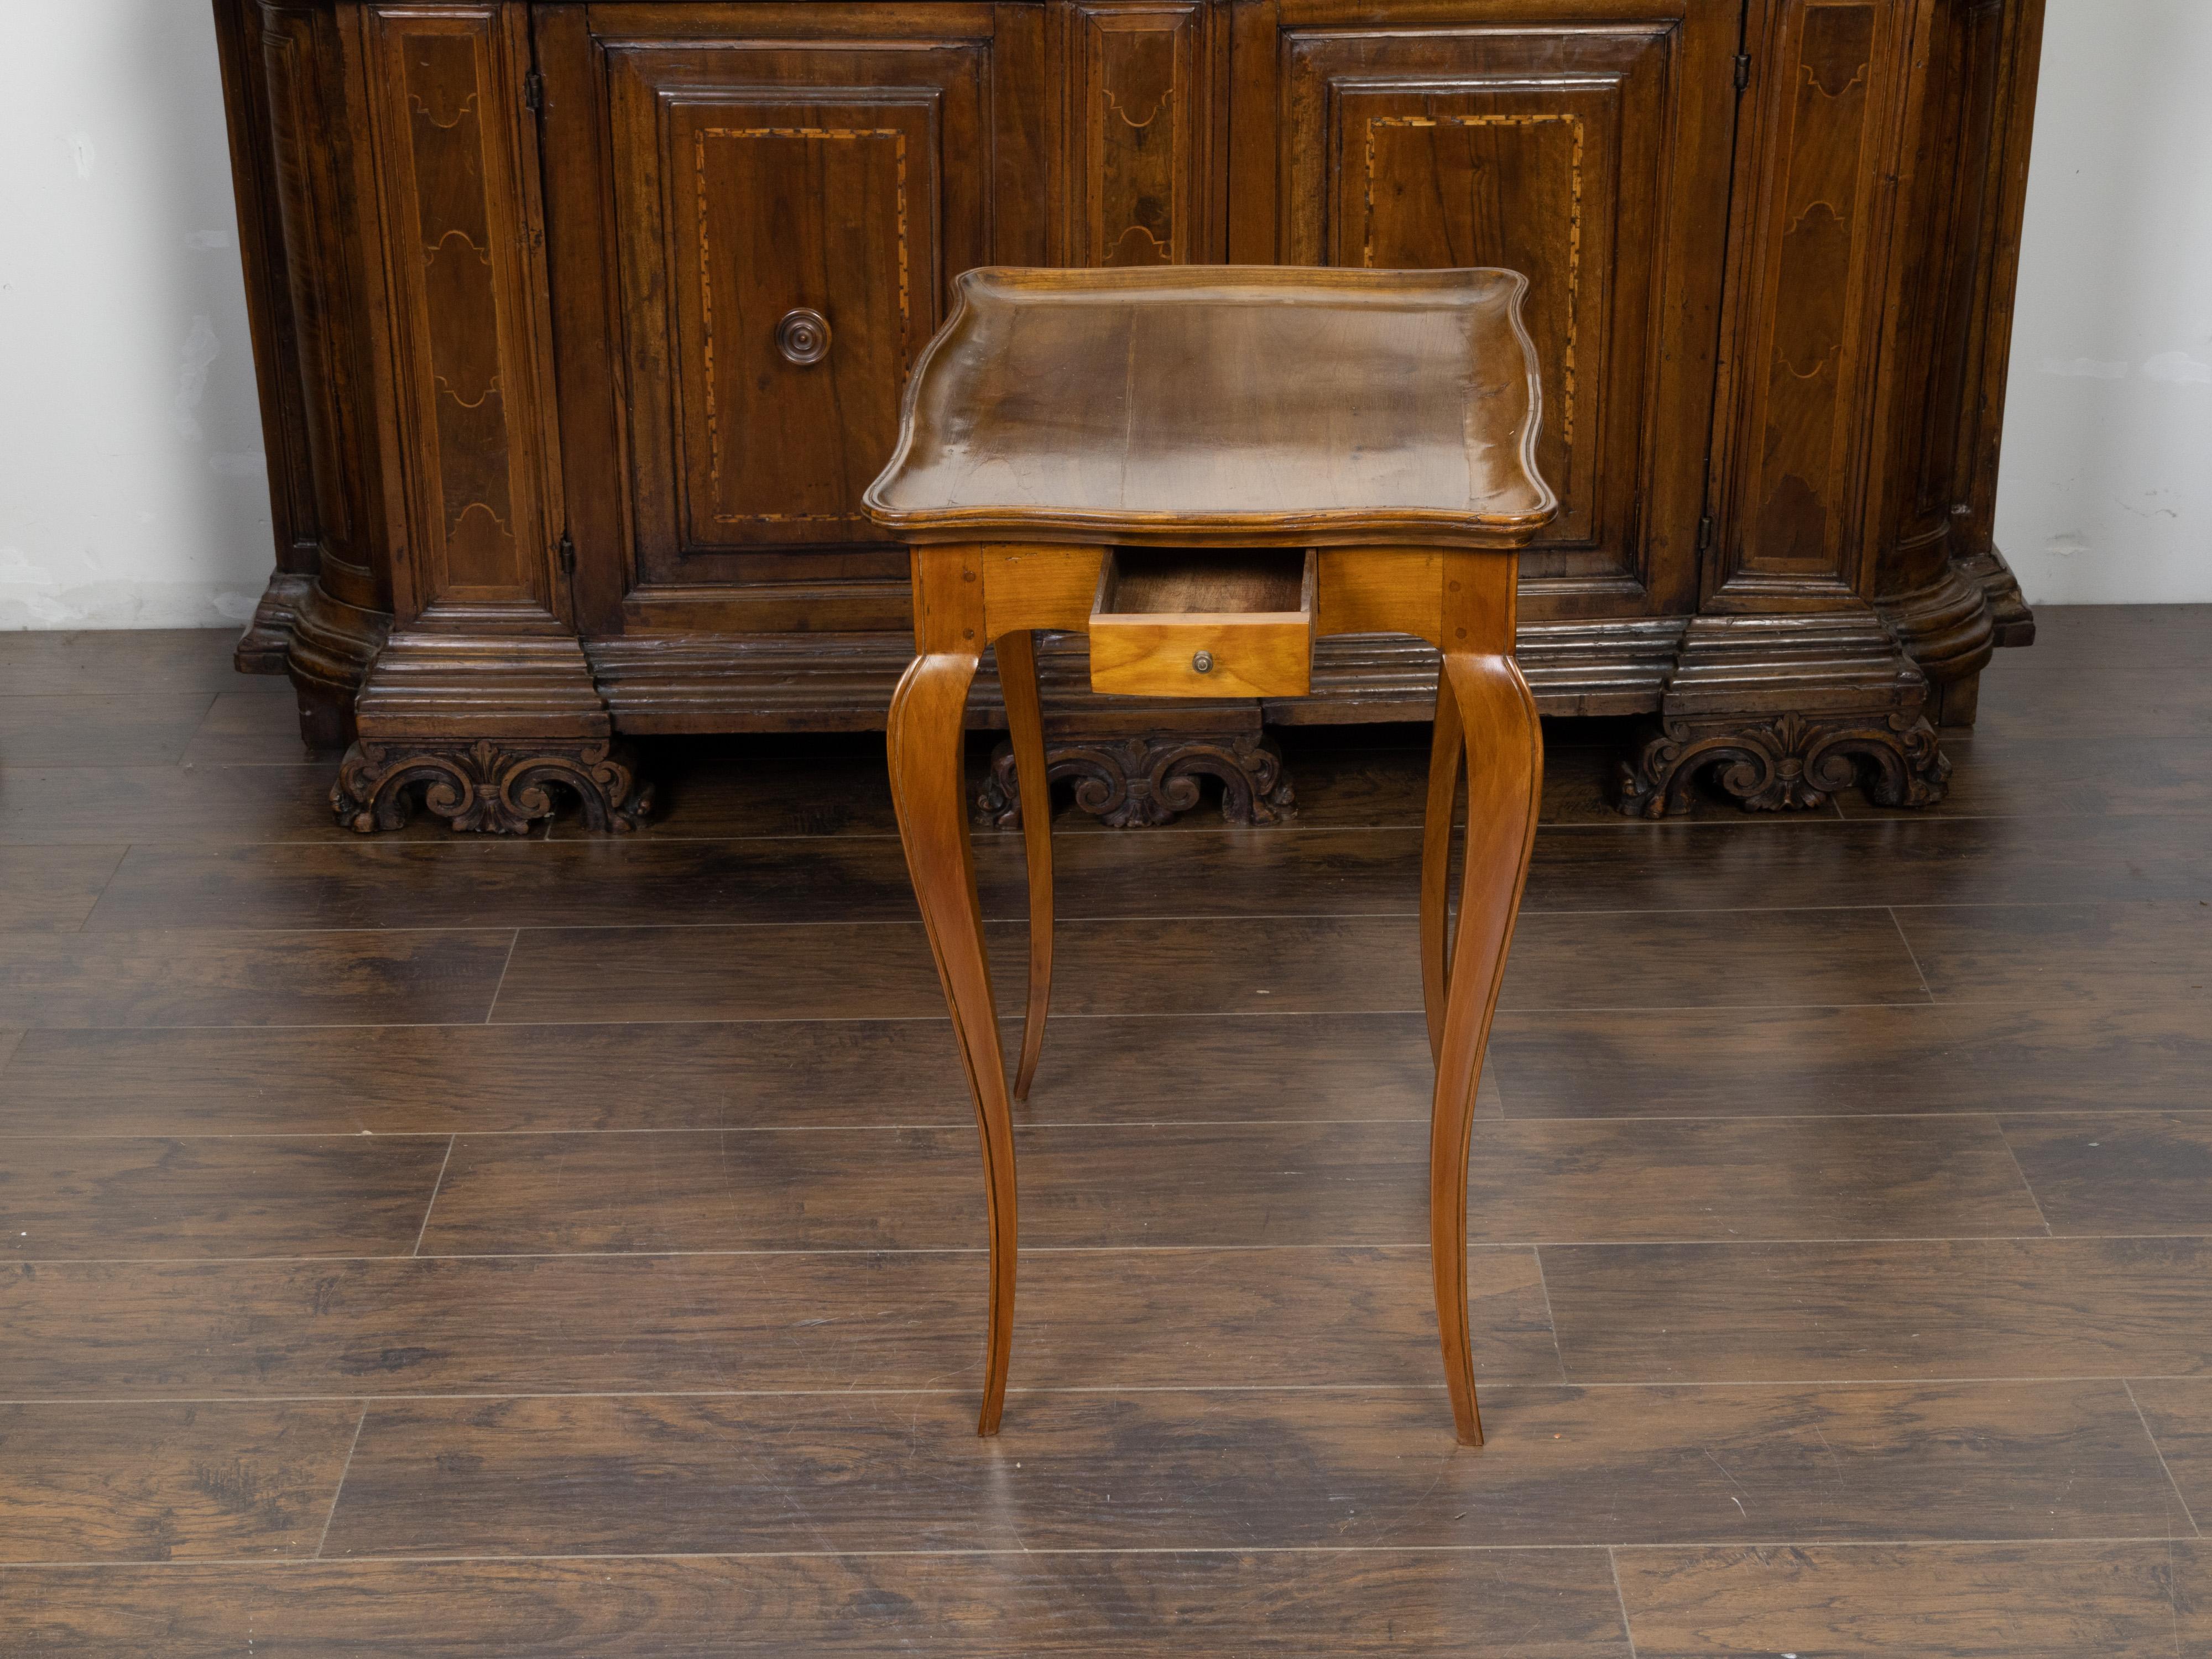 A French Louis XV style walnut side table from the 19th century, with tray top, single drawer and cabriole legs. Created in France during the 19th century, this walnut side table features a serpentine tray top sitting above a simple apron concealing